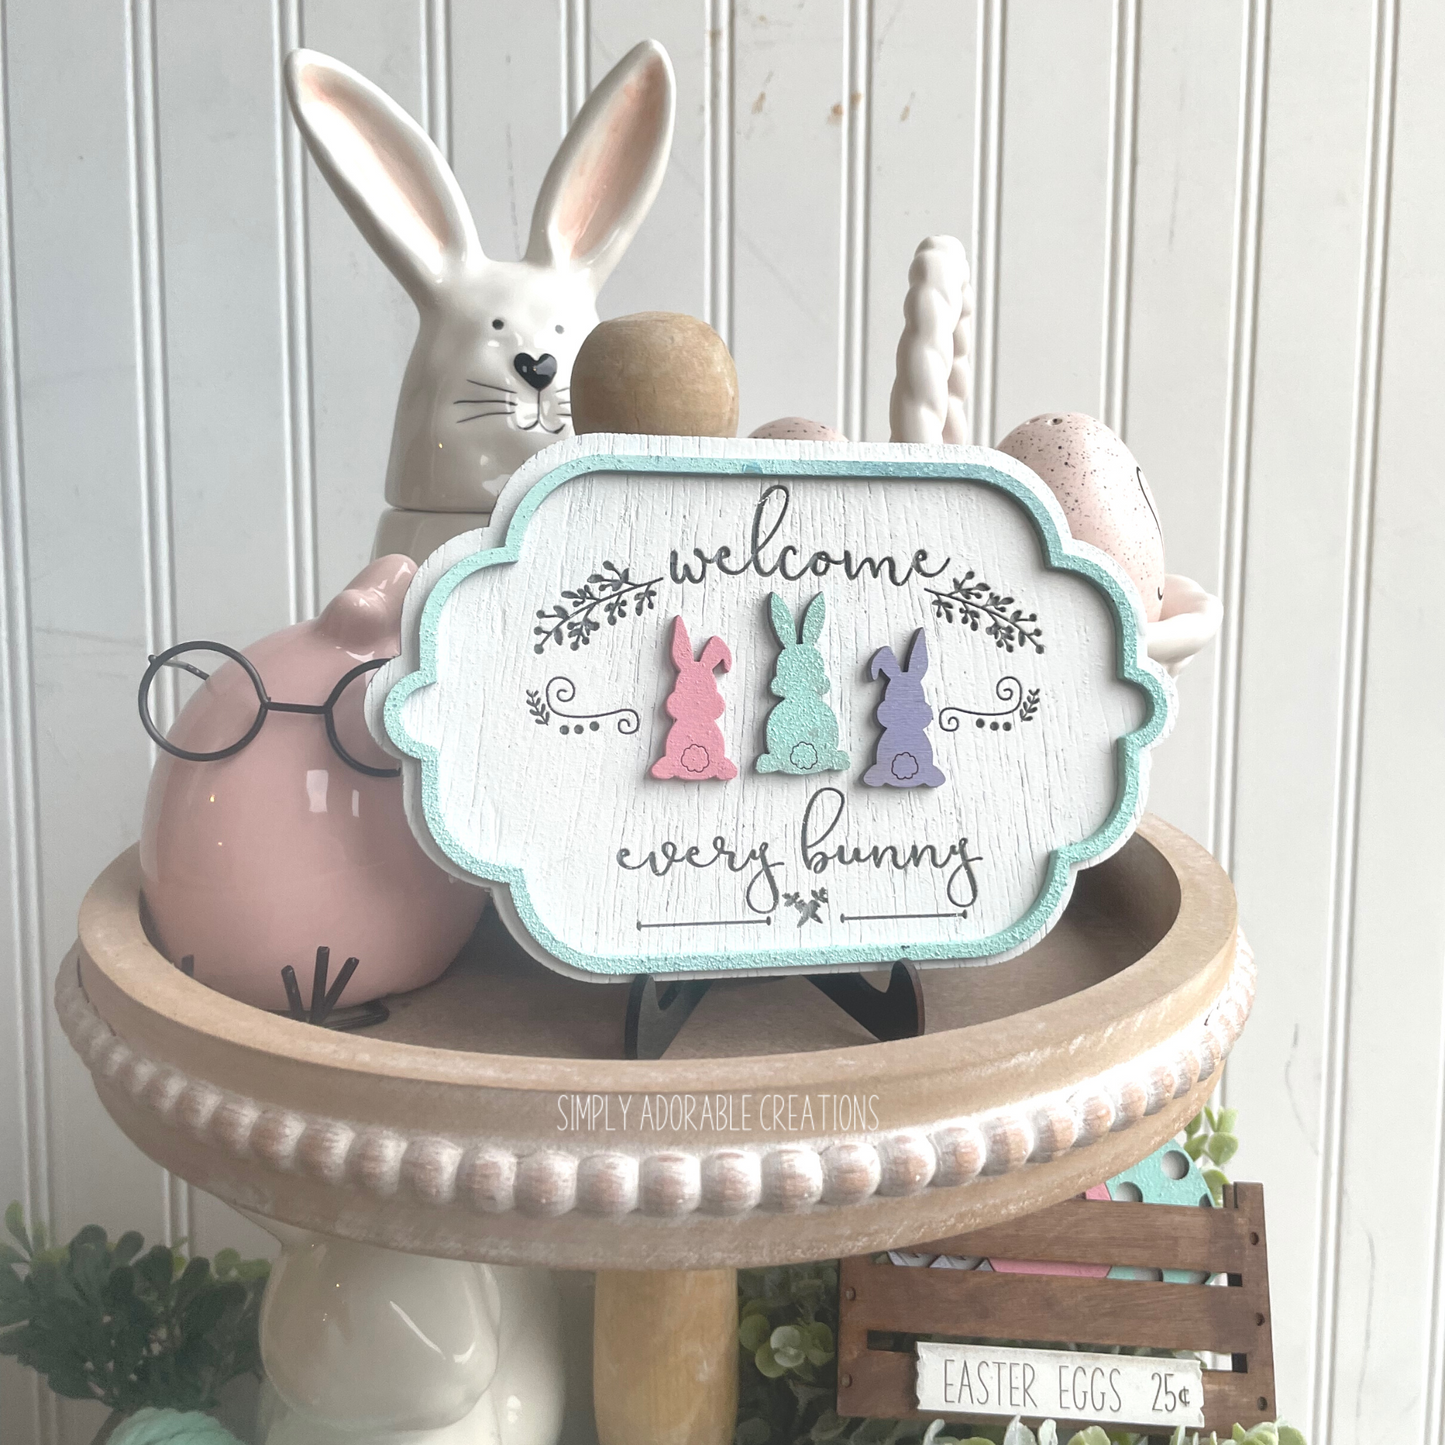 Every Bunny Welcome Mini Tiered Tray Sign